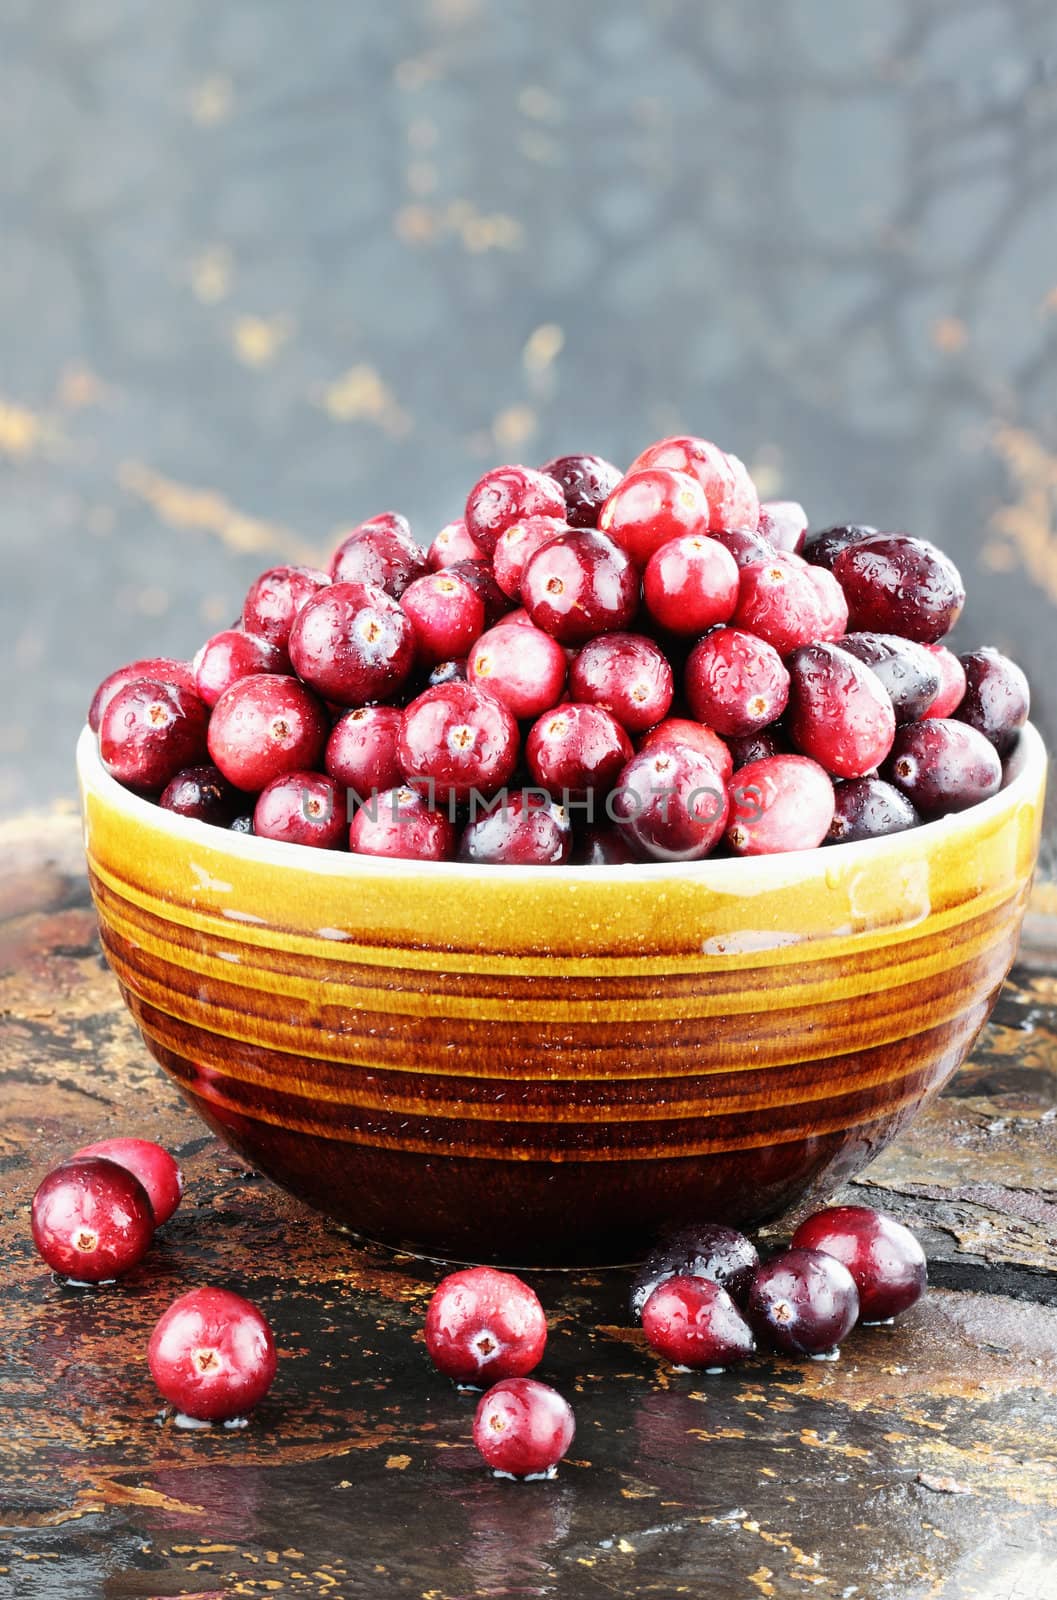 Freshly washed whole cranberries against a rustic background with selective focus.  Room for copy space.